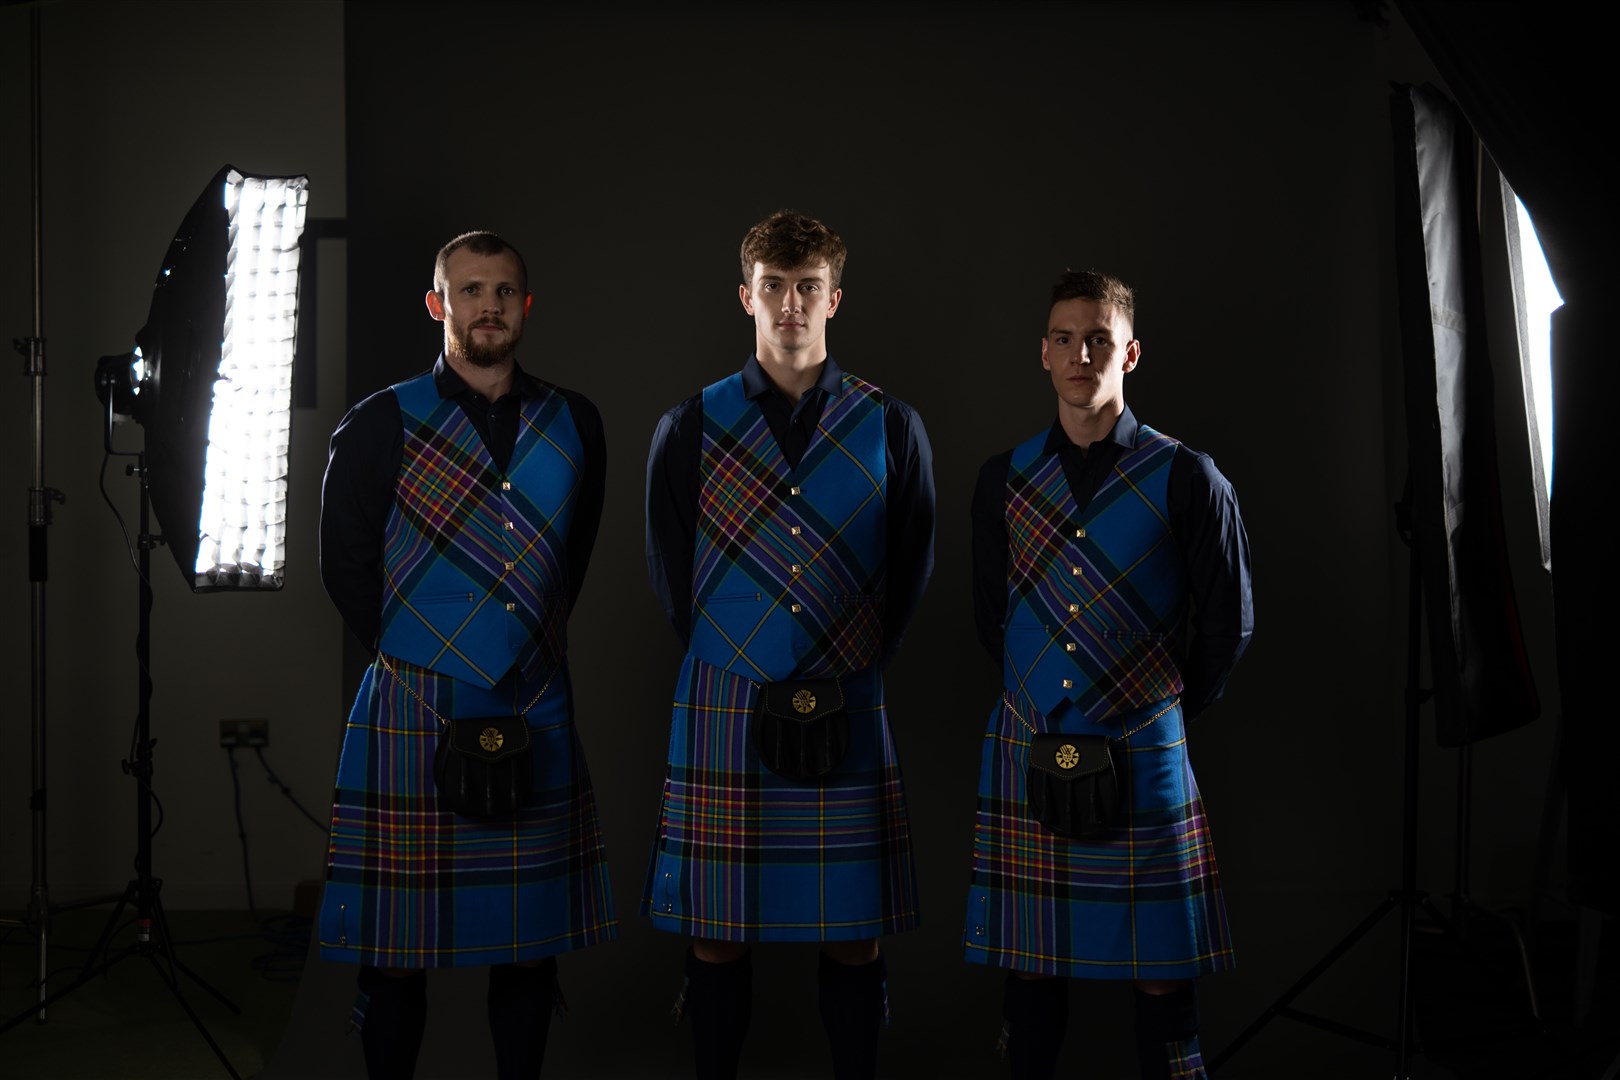 Ross Murdoch, Ross Beattie and Cameron Main. Picture: MBP Ltd for Team Scotland